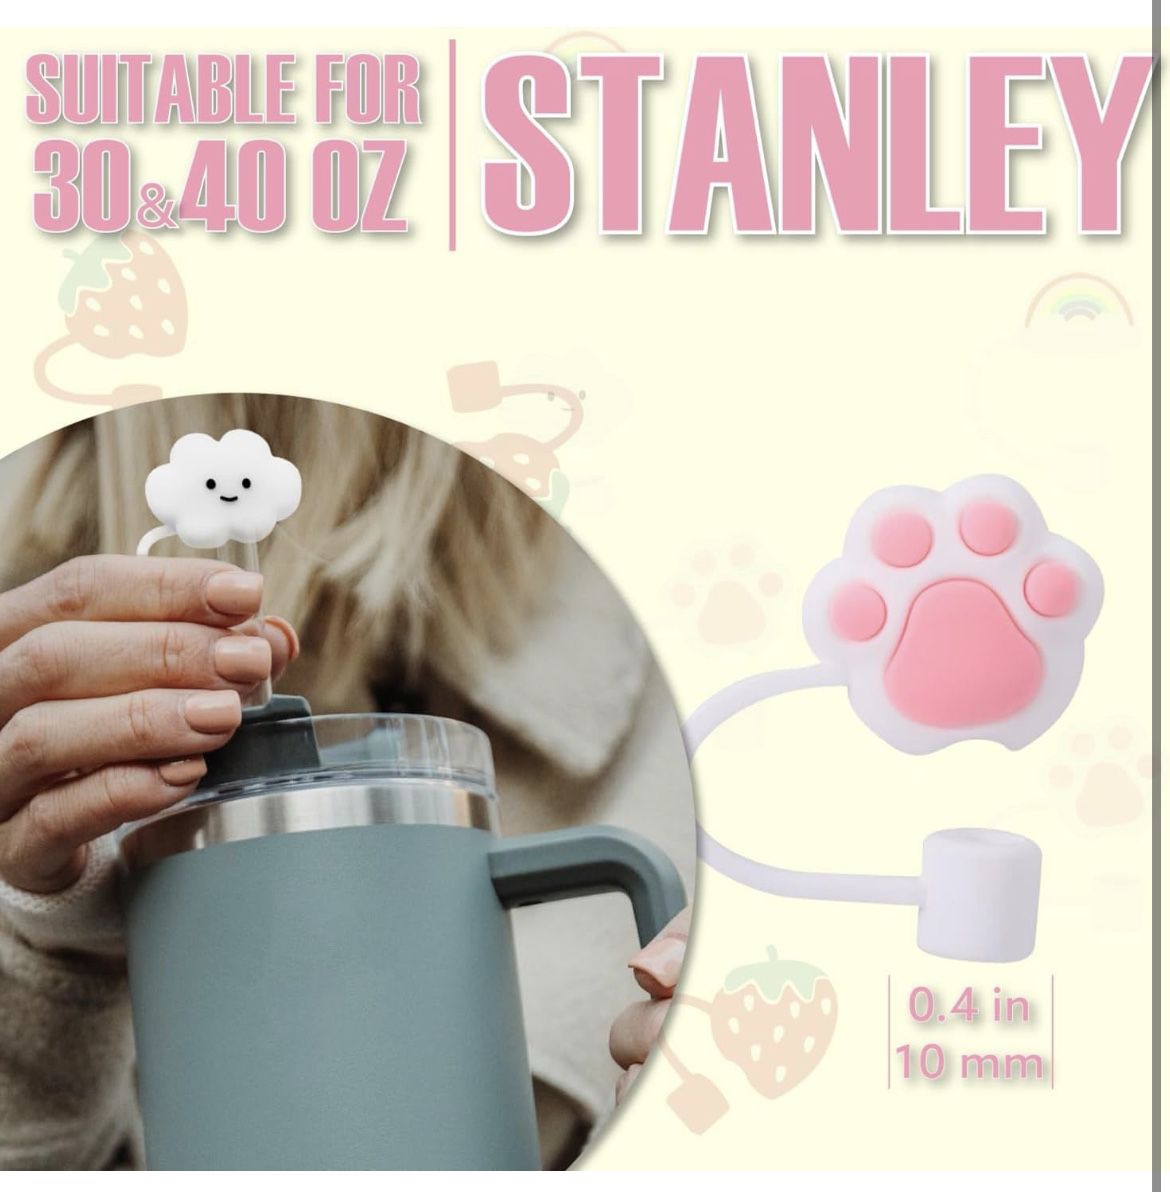 Straw Cover For Stanley, 5 PCS Suitable Silicone Stanley Cup Straw Cover -  Variable Colour Stanley Straw Cover - Straw Covers for Reusable Straws - St  for Sale in Ontario, CA - OfferUp